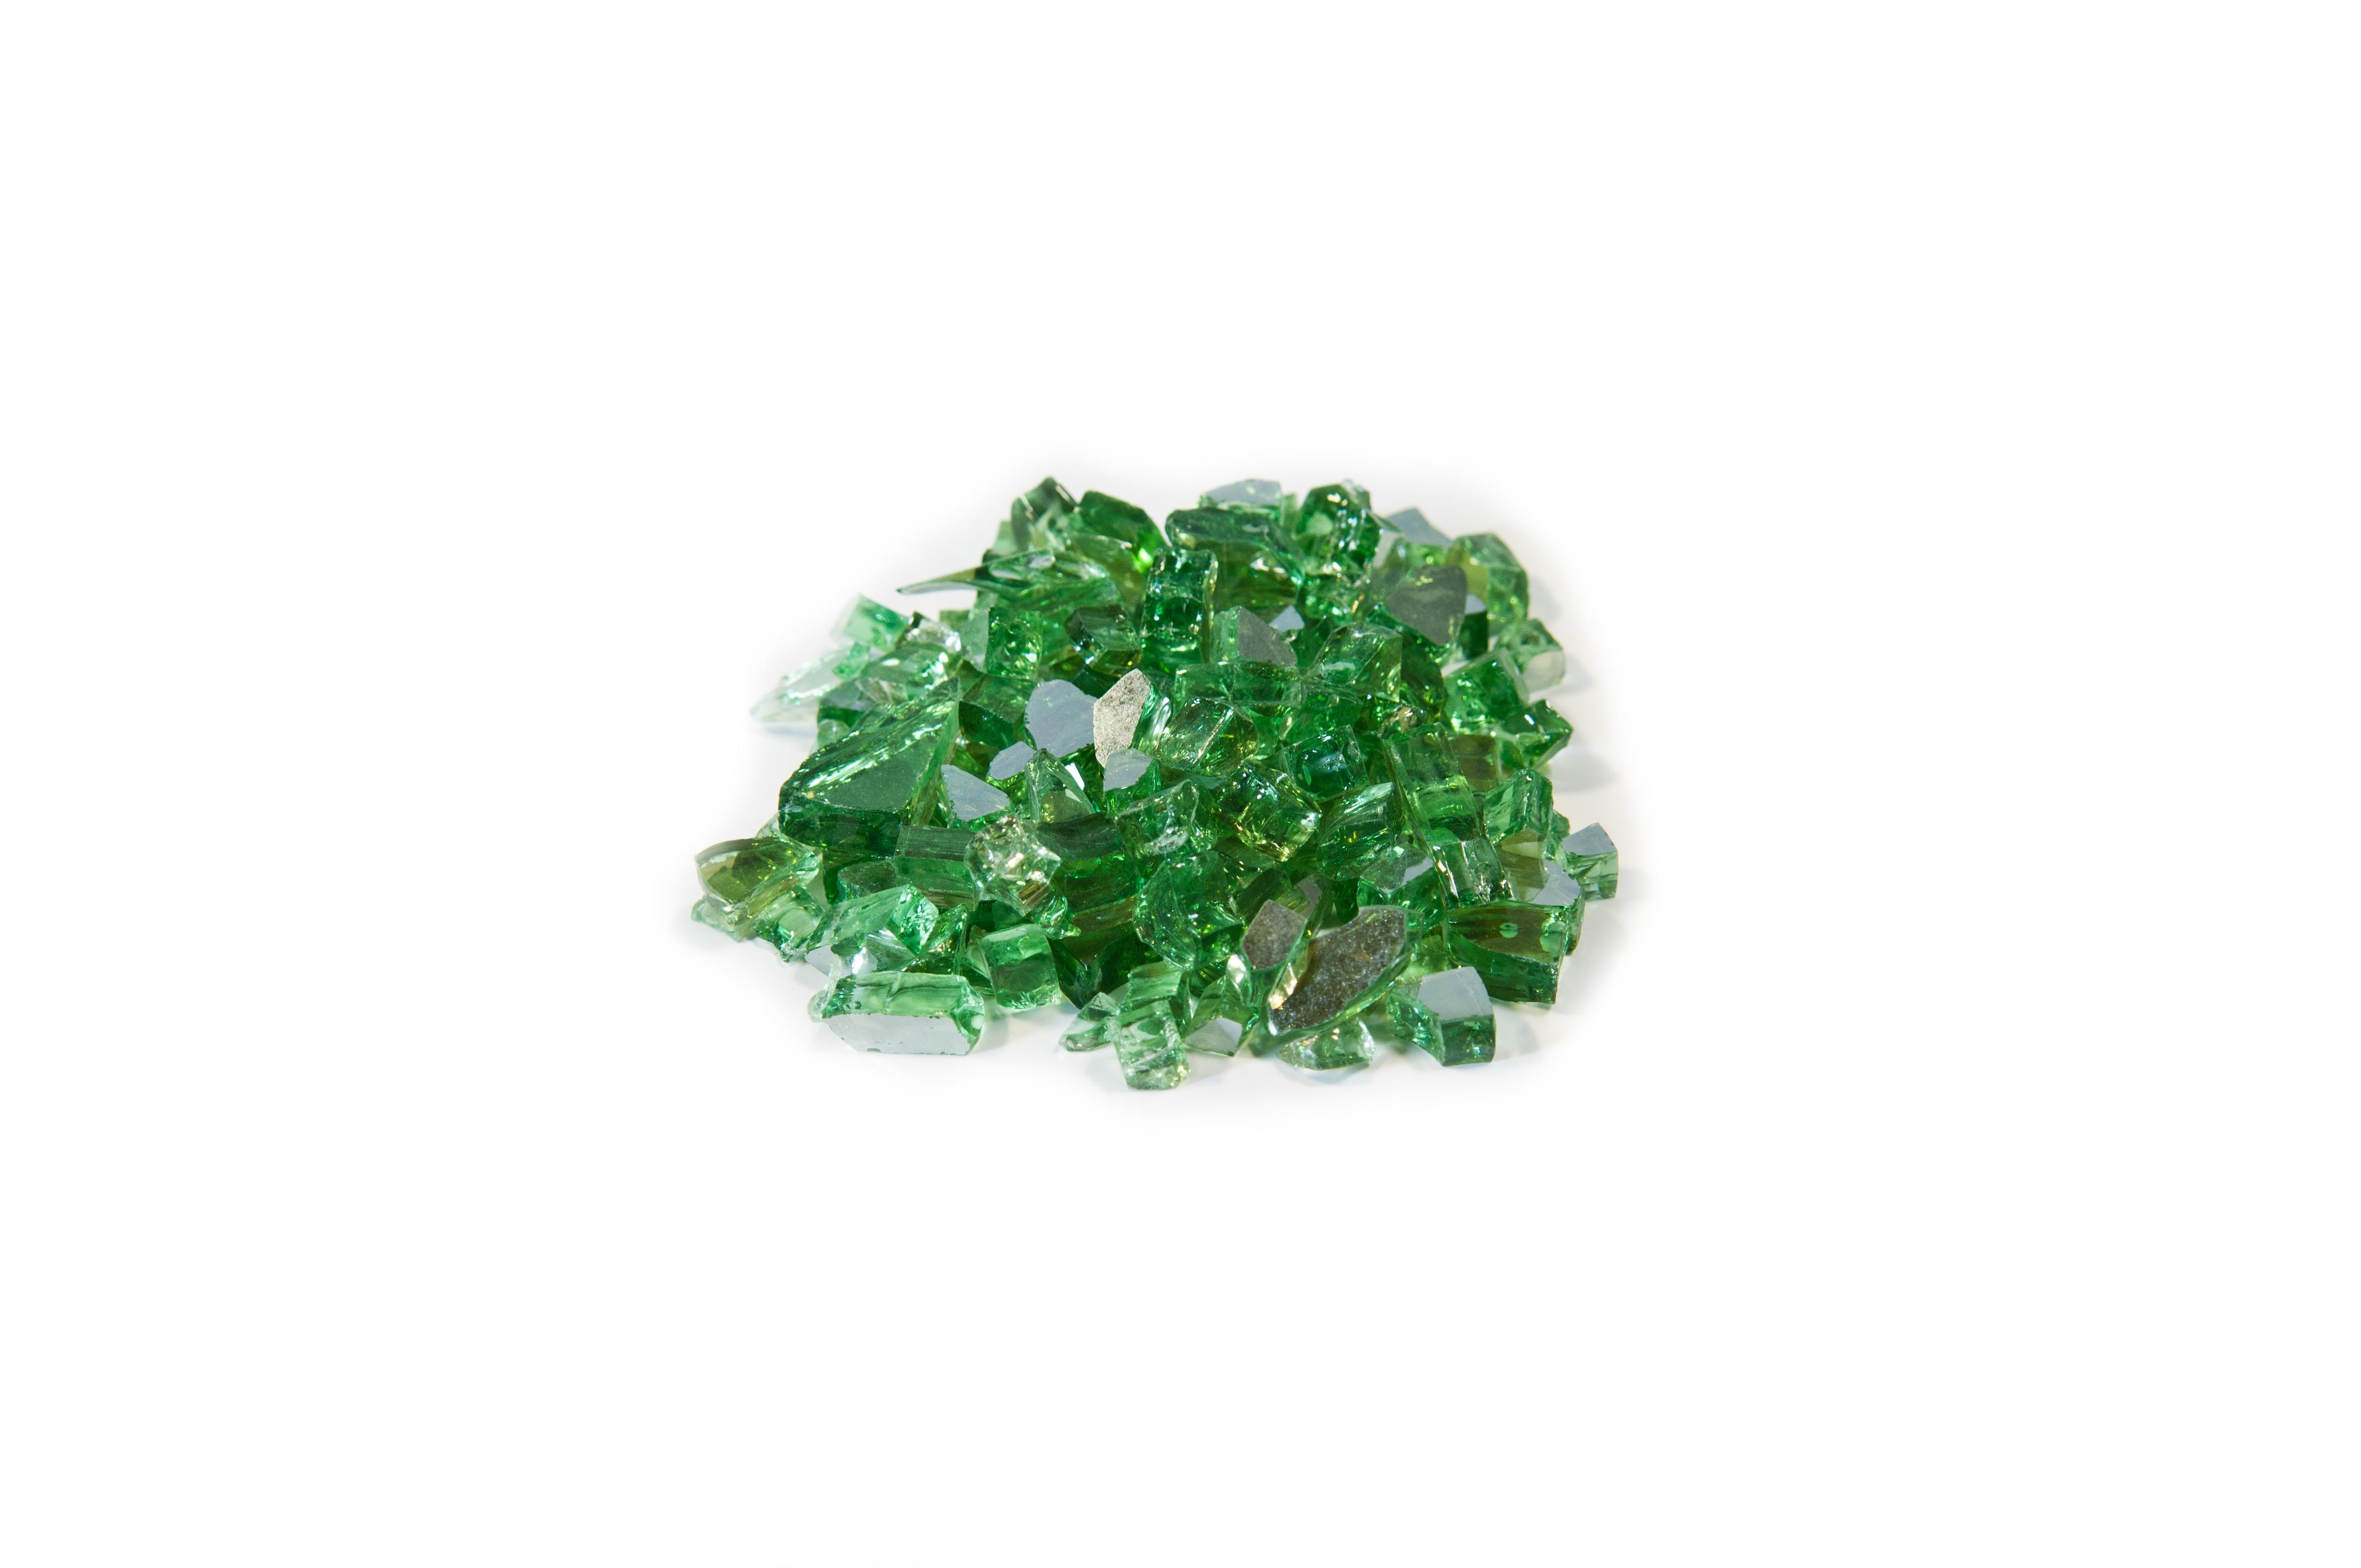 fire glass emerald product image